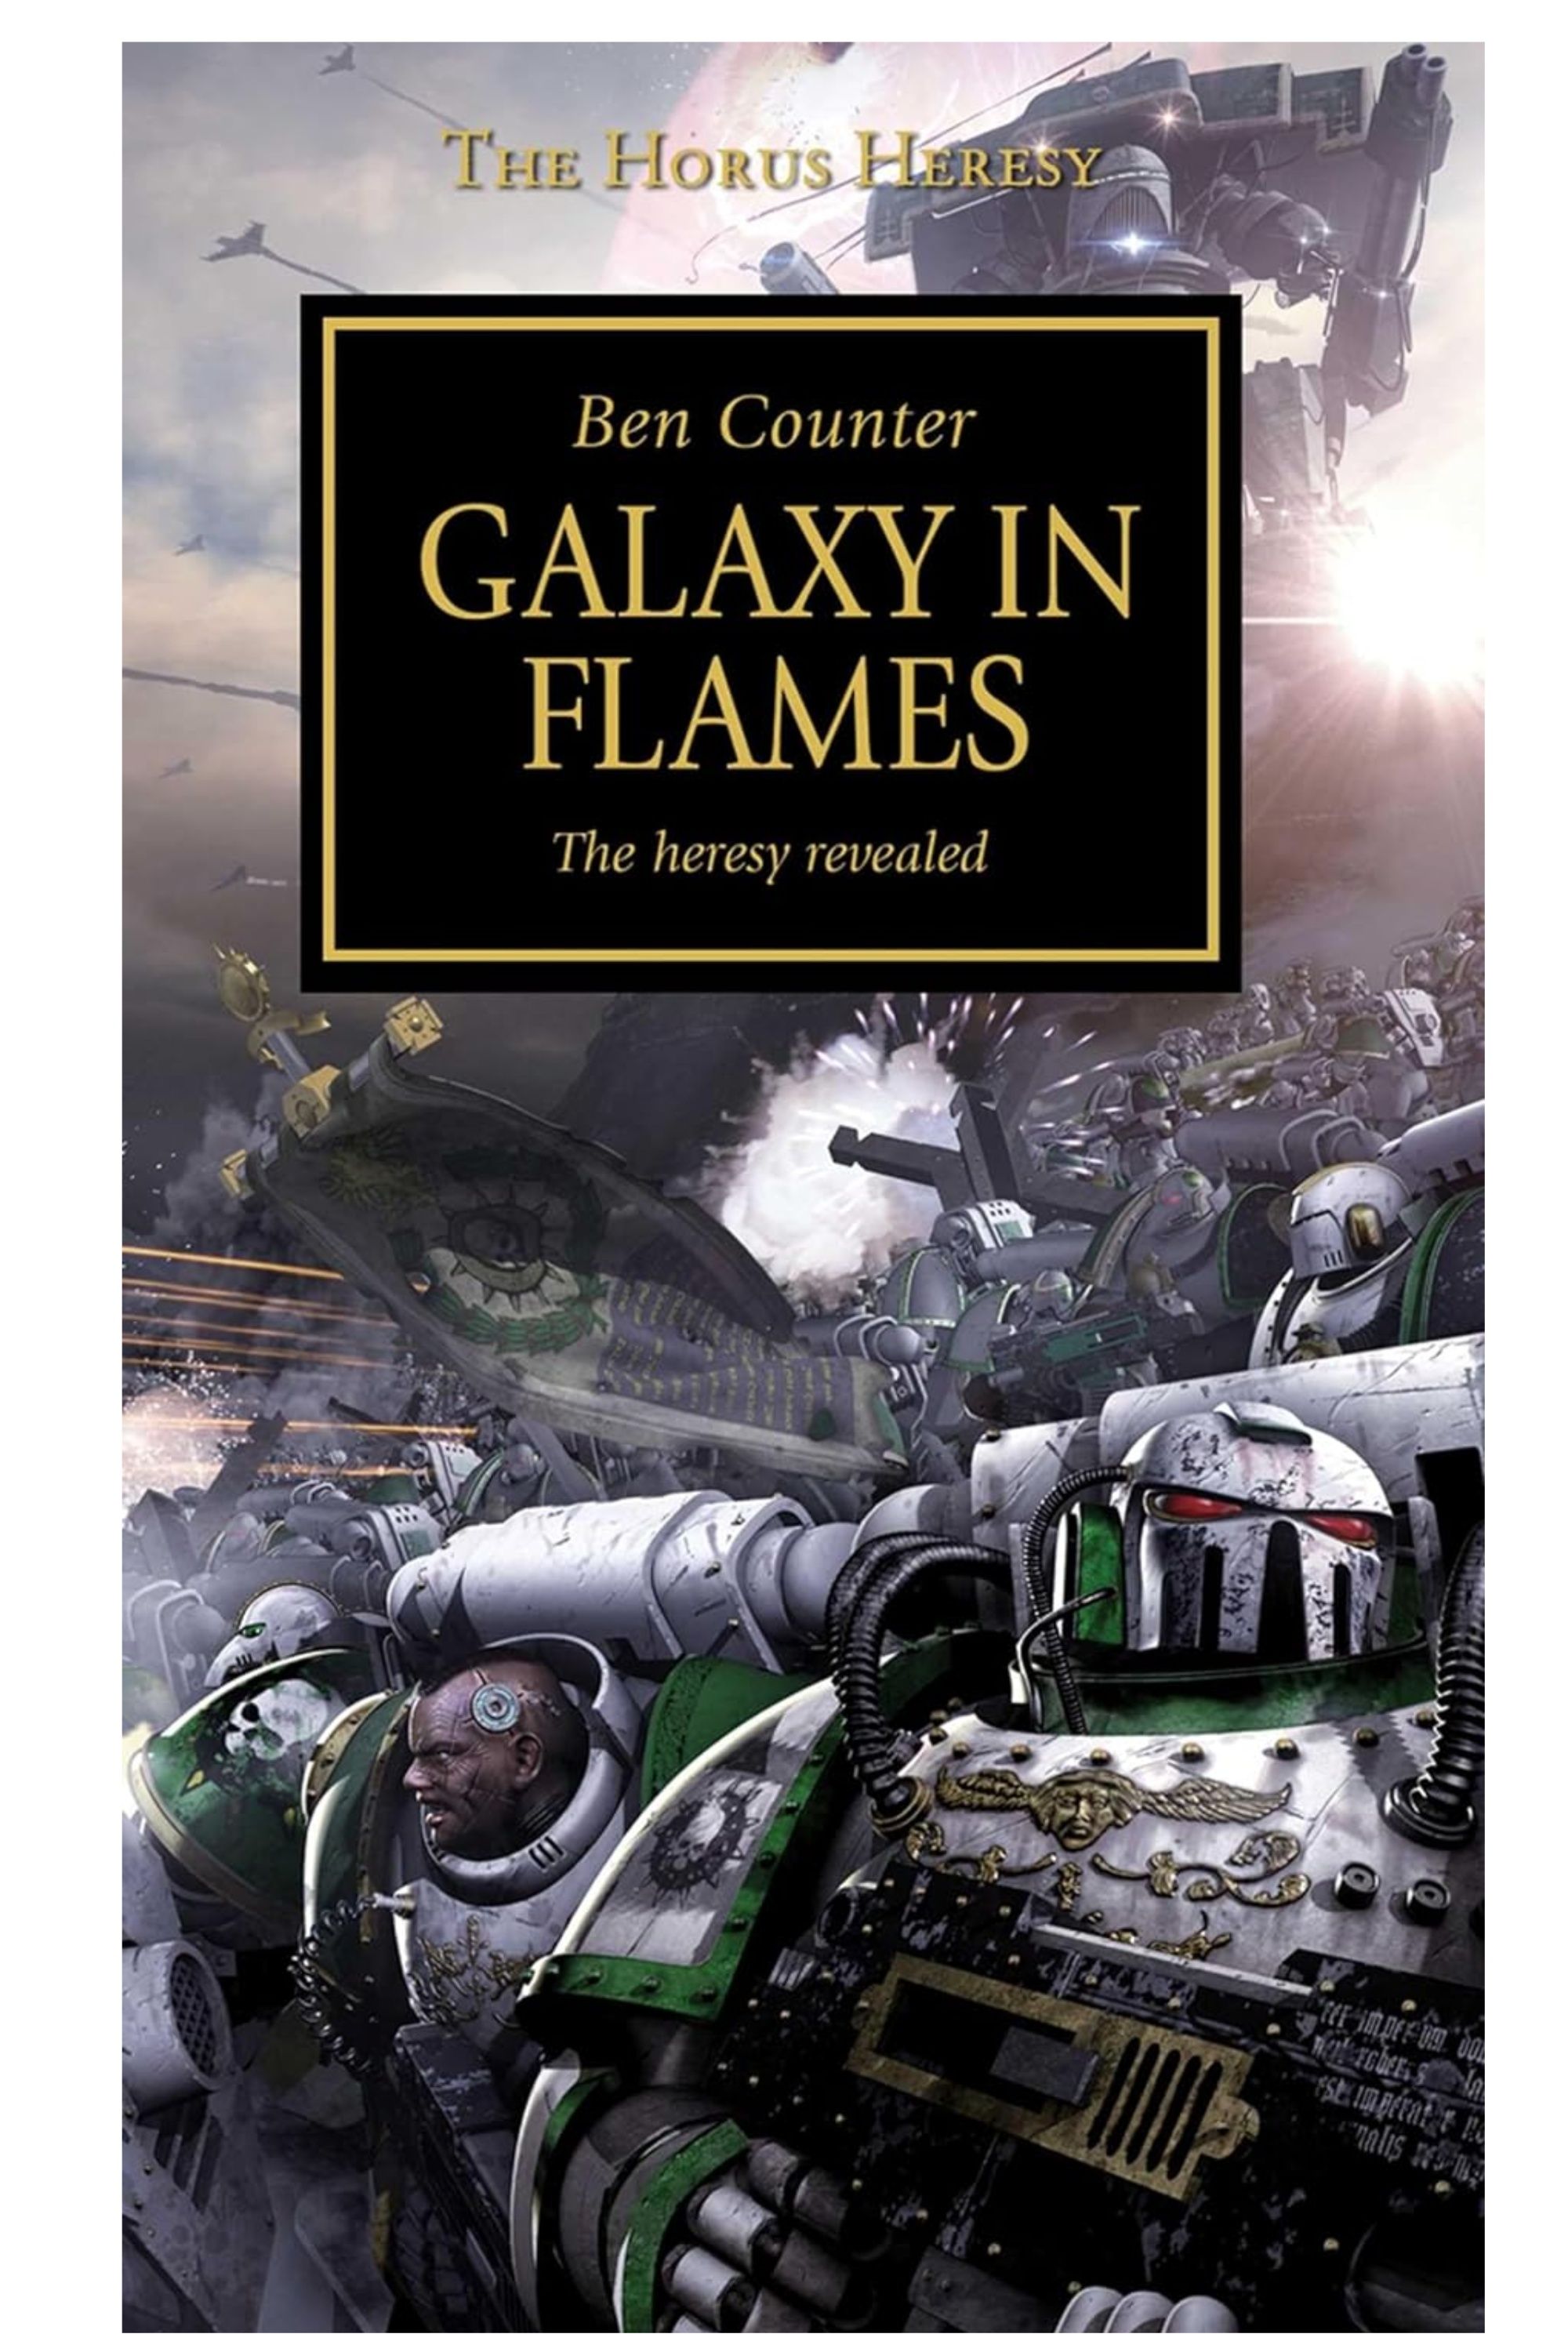 The cover of Ben Counter's Horus Heresy: Galaxy in Flames.